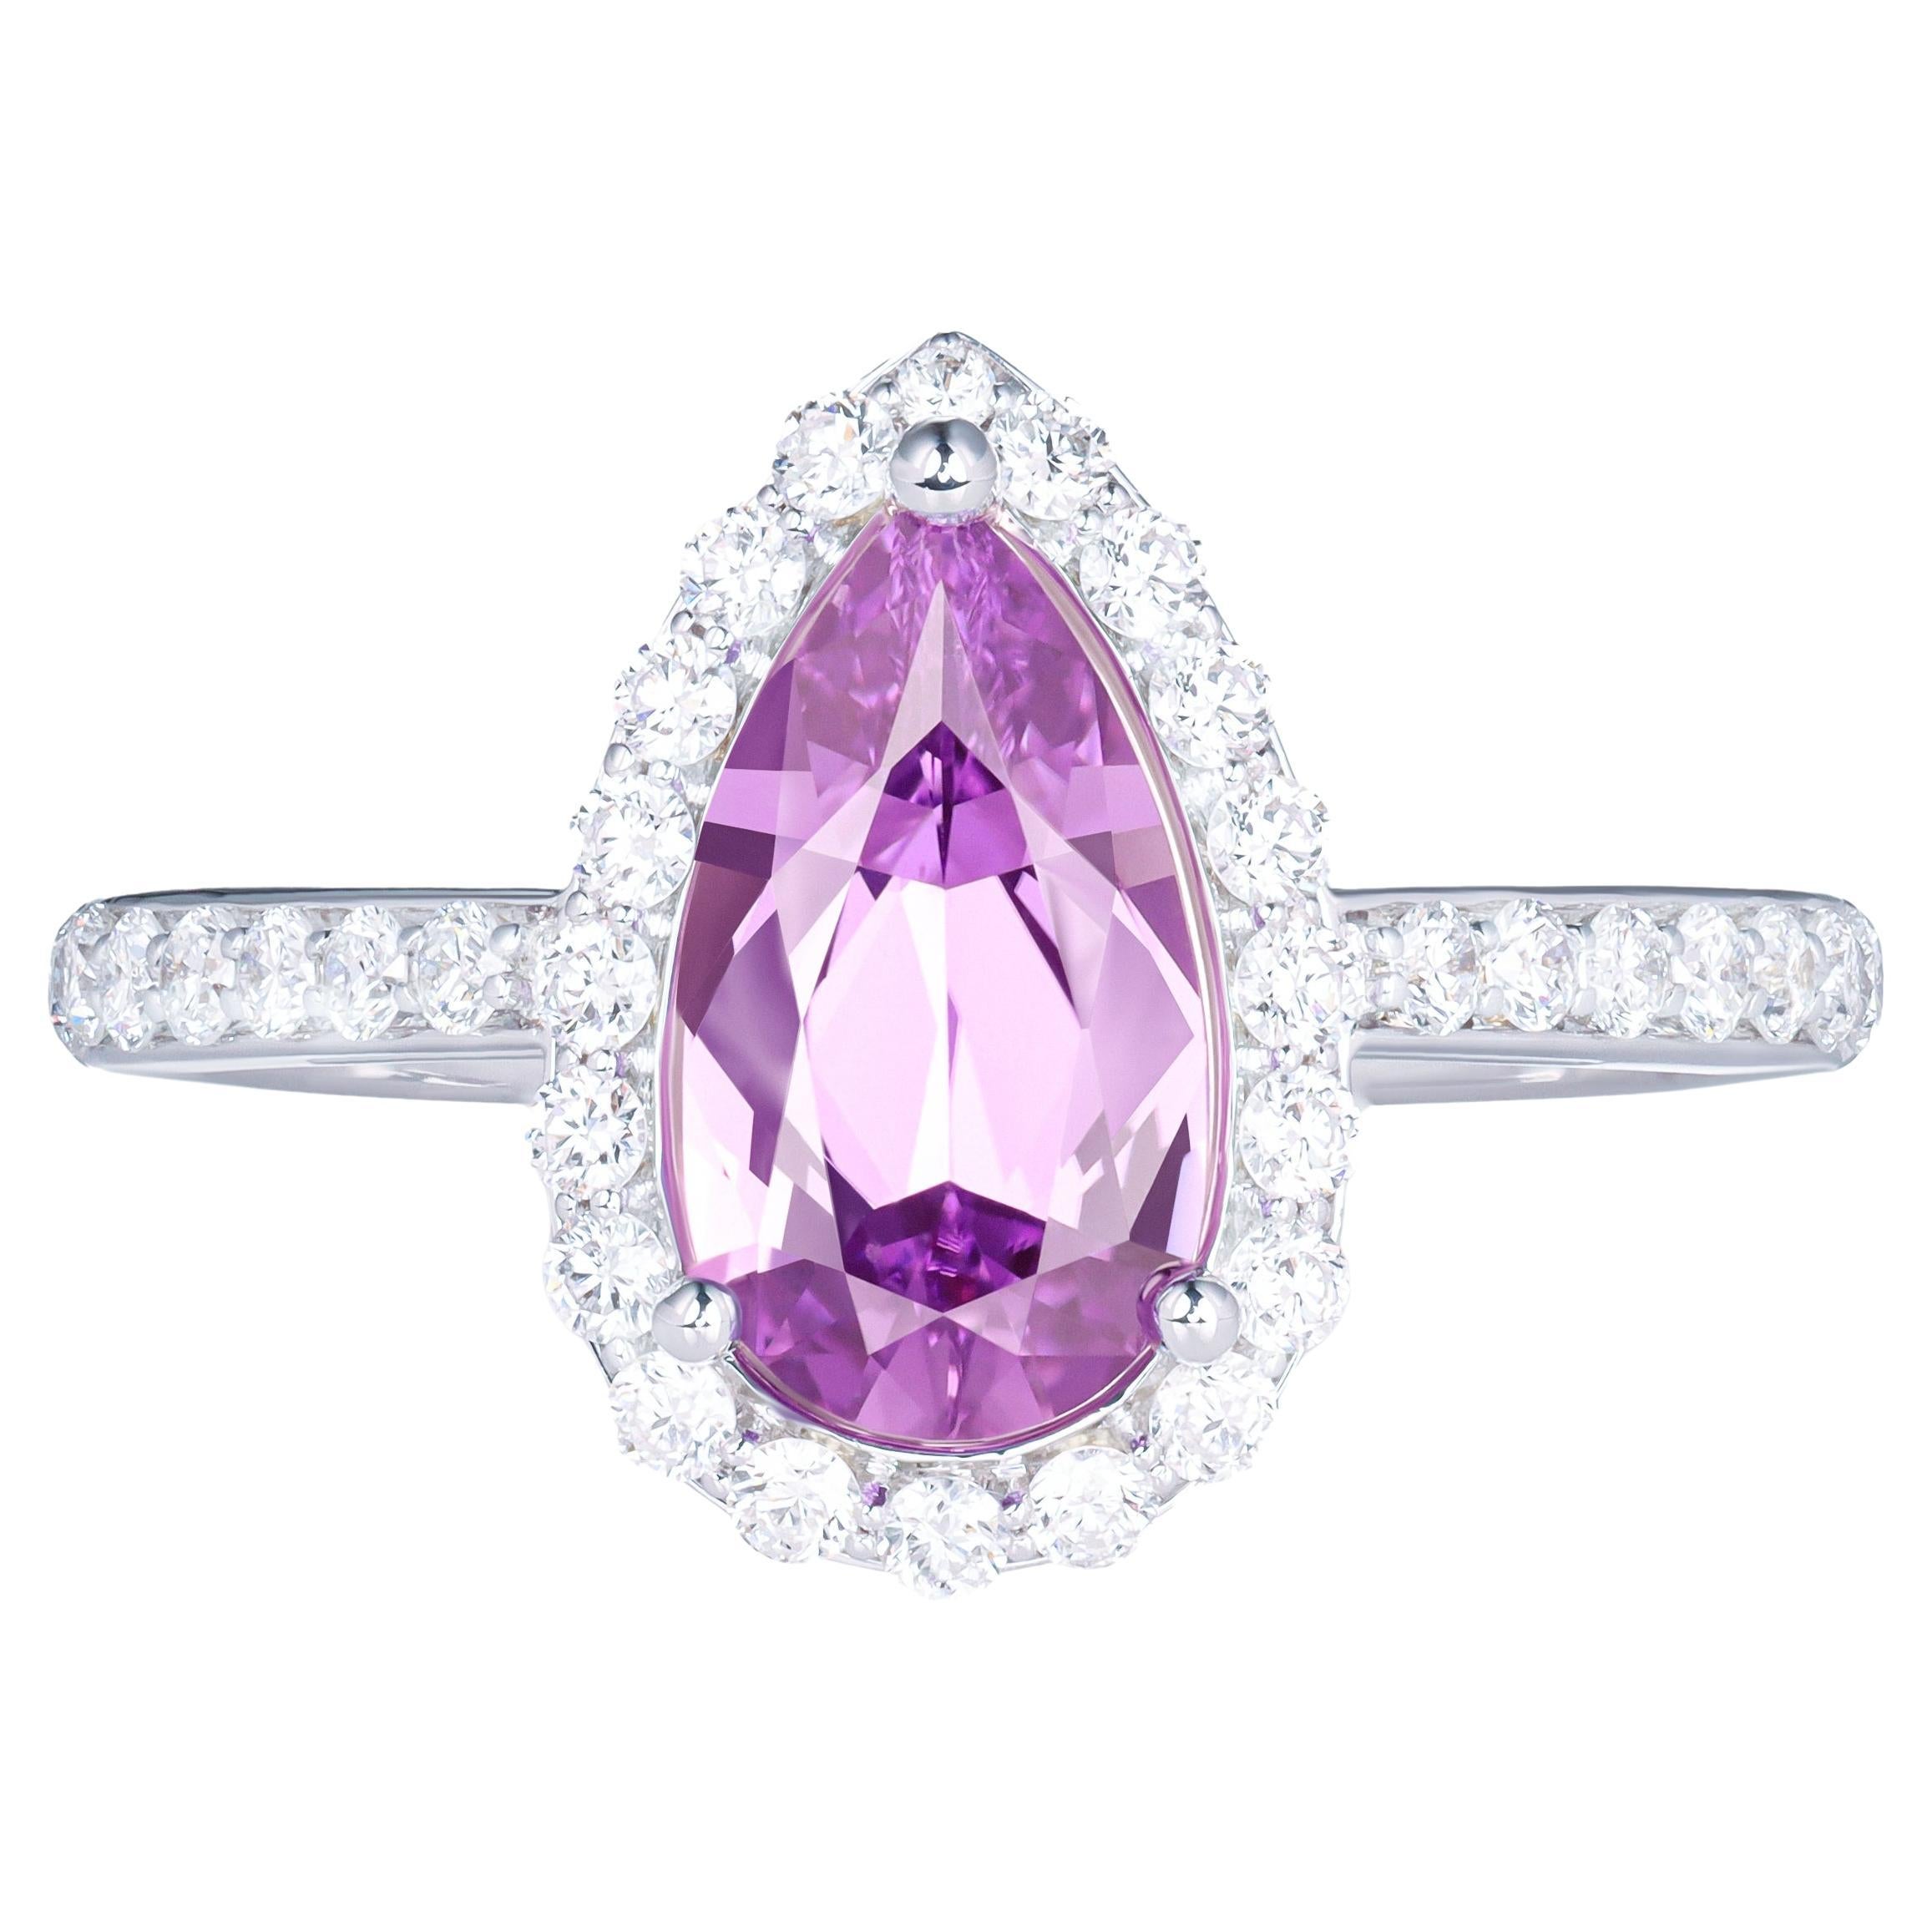 Purple Sapphire 1.23 carat Ring with diamonds in 18K white gold